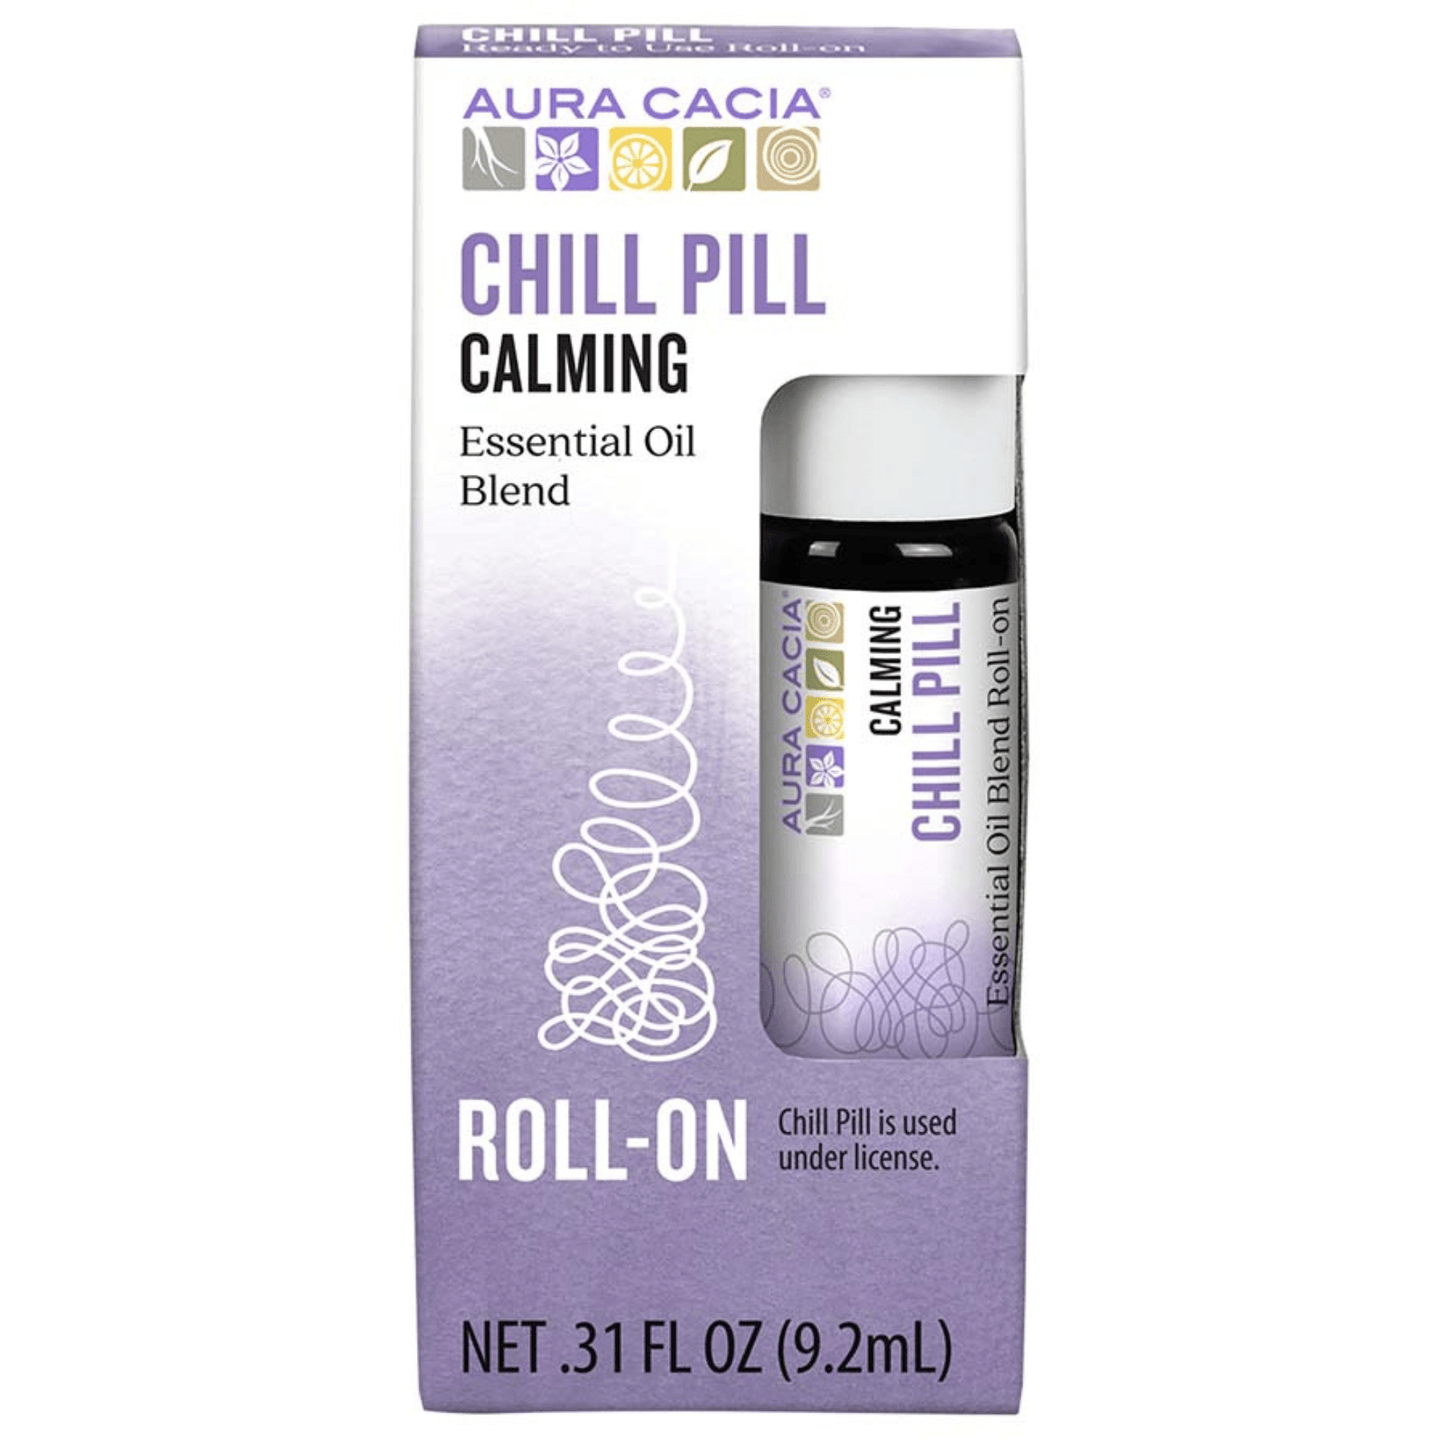 Primary Image of Chill Pill Calming Roll On